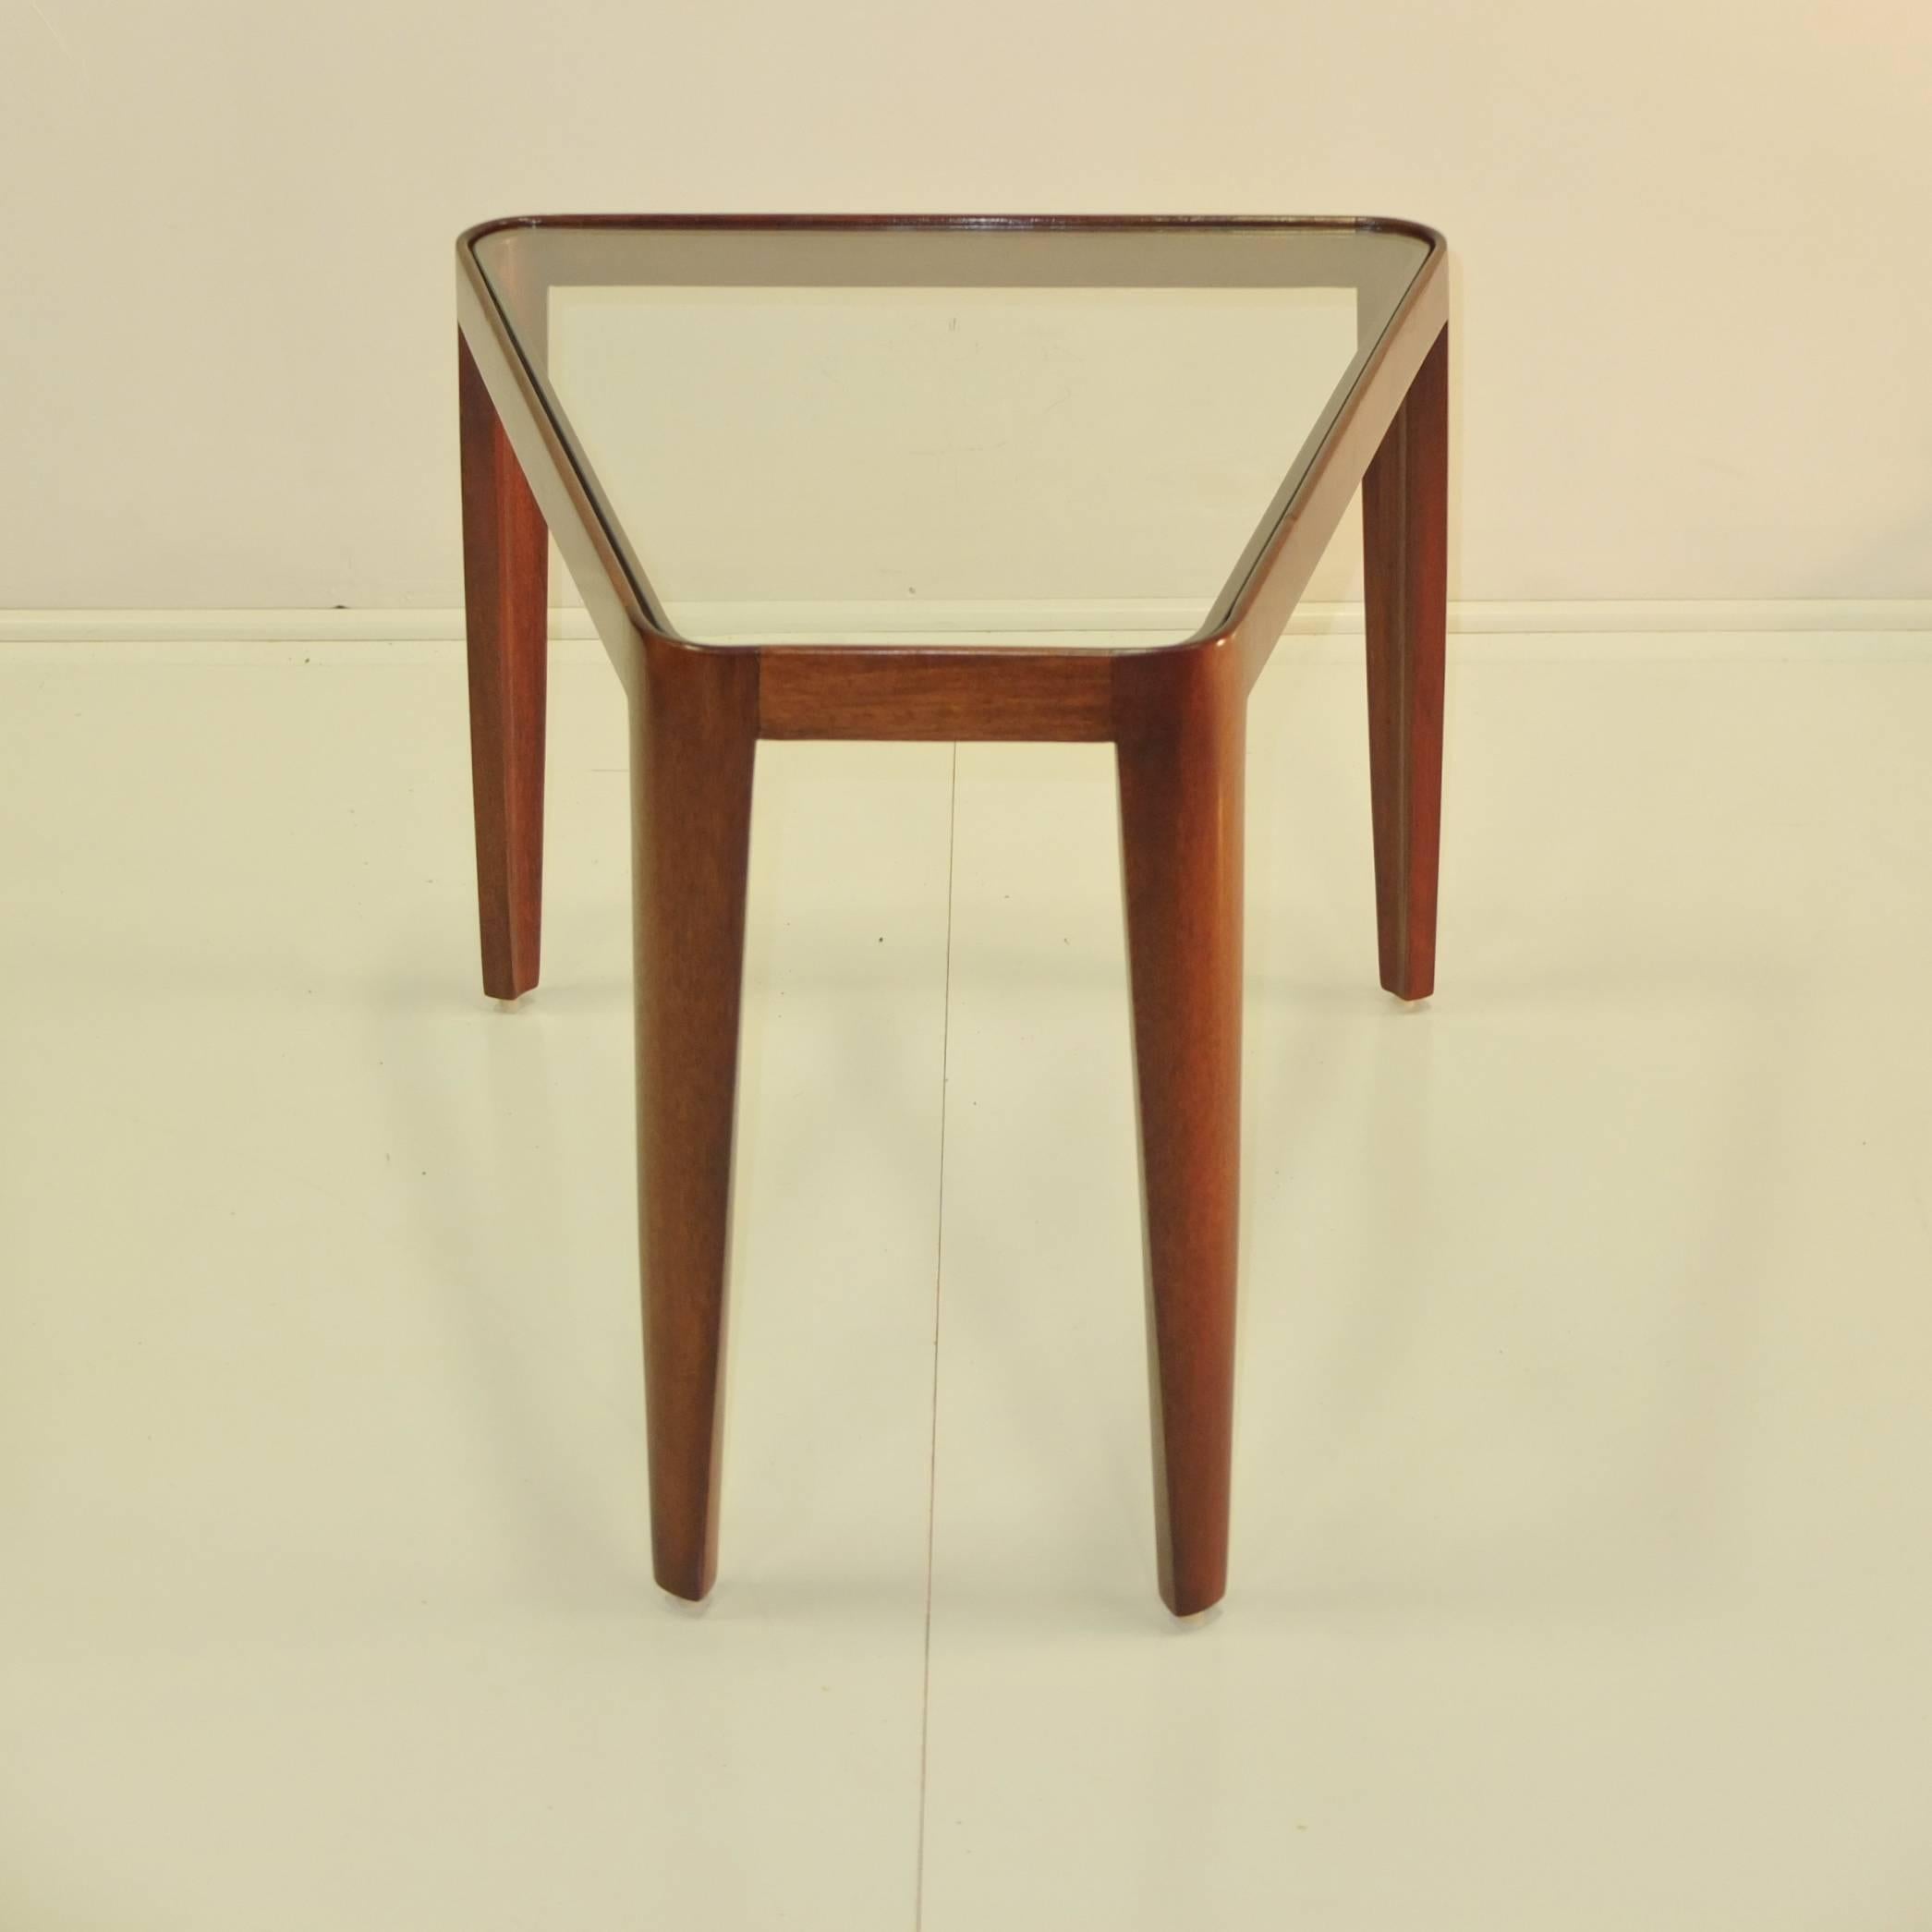 Wedge shape side table in mahogany with glass top by Edward Wormley for Dunbar, 1948. Model number 4809.